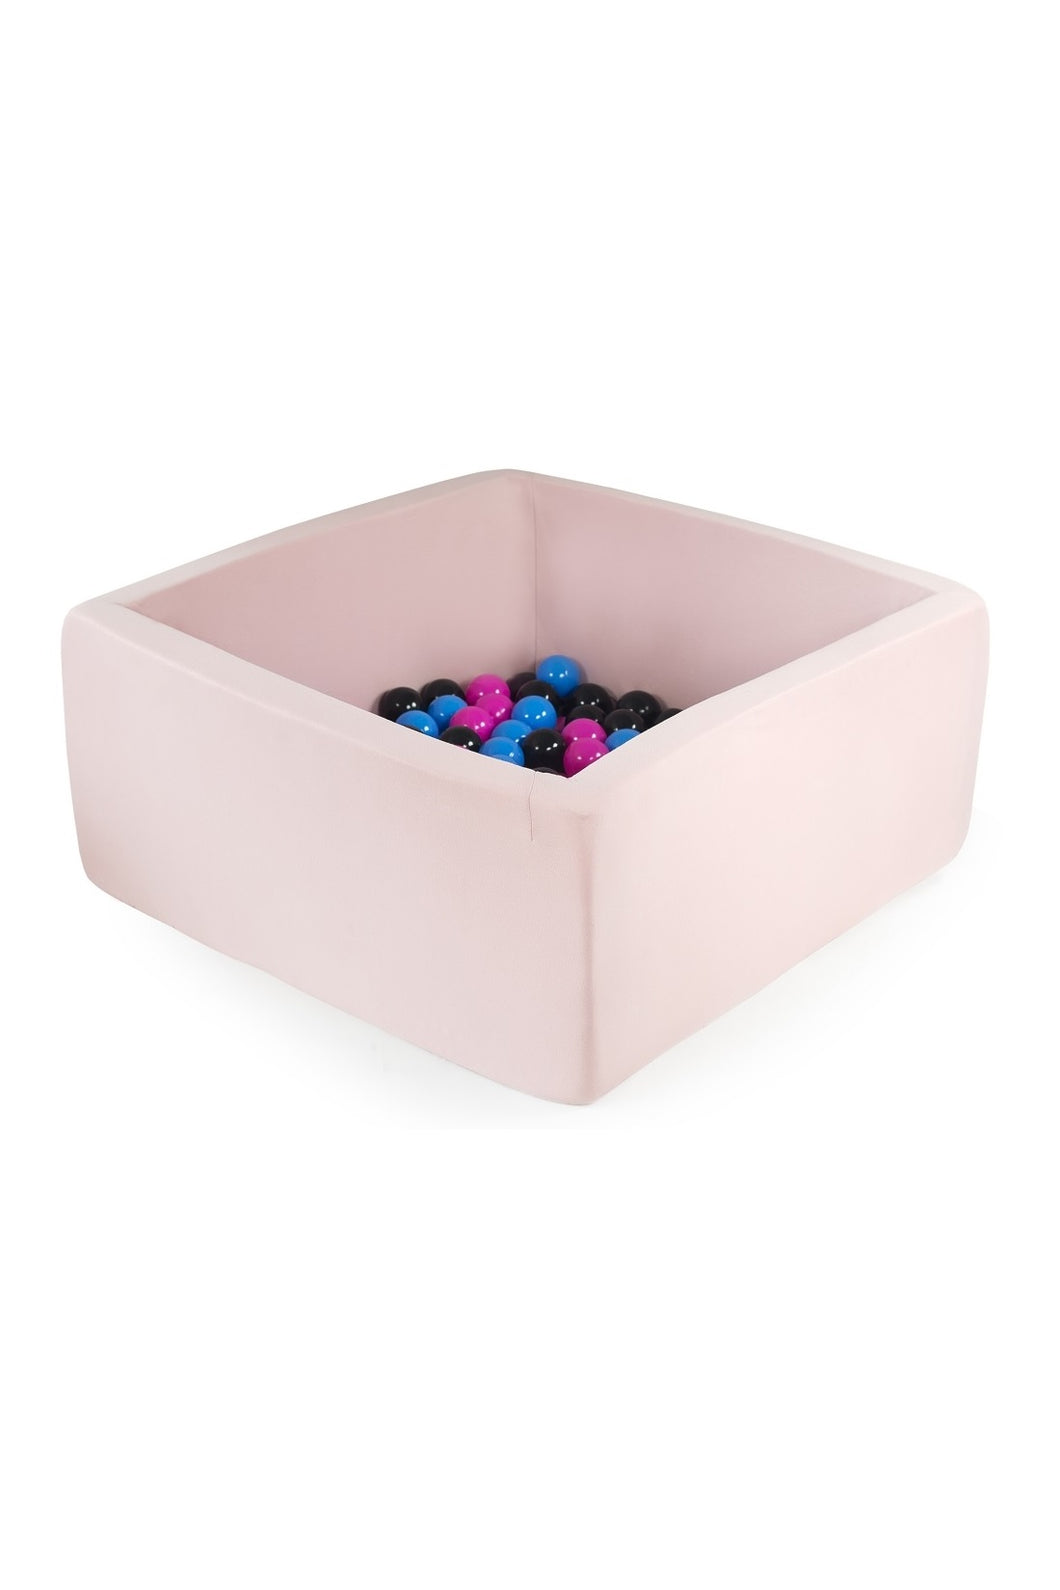 Misioo Ball Pits Square Light Pink Small 90 X 90 X 40 1